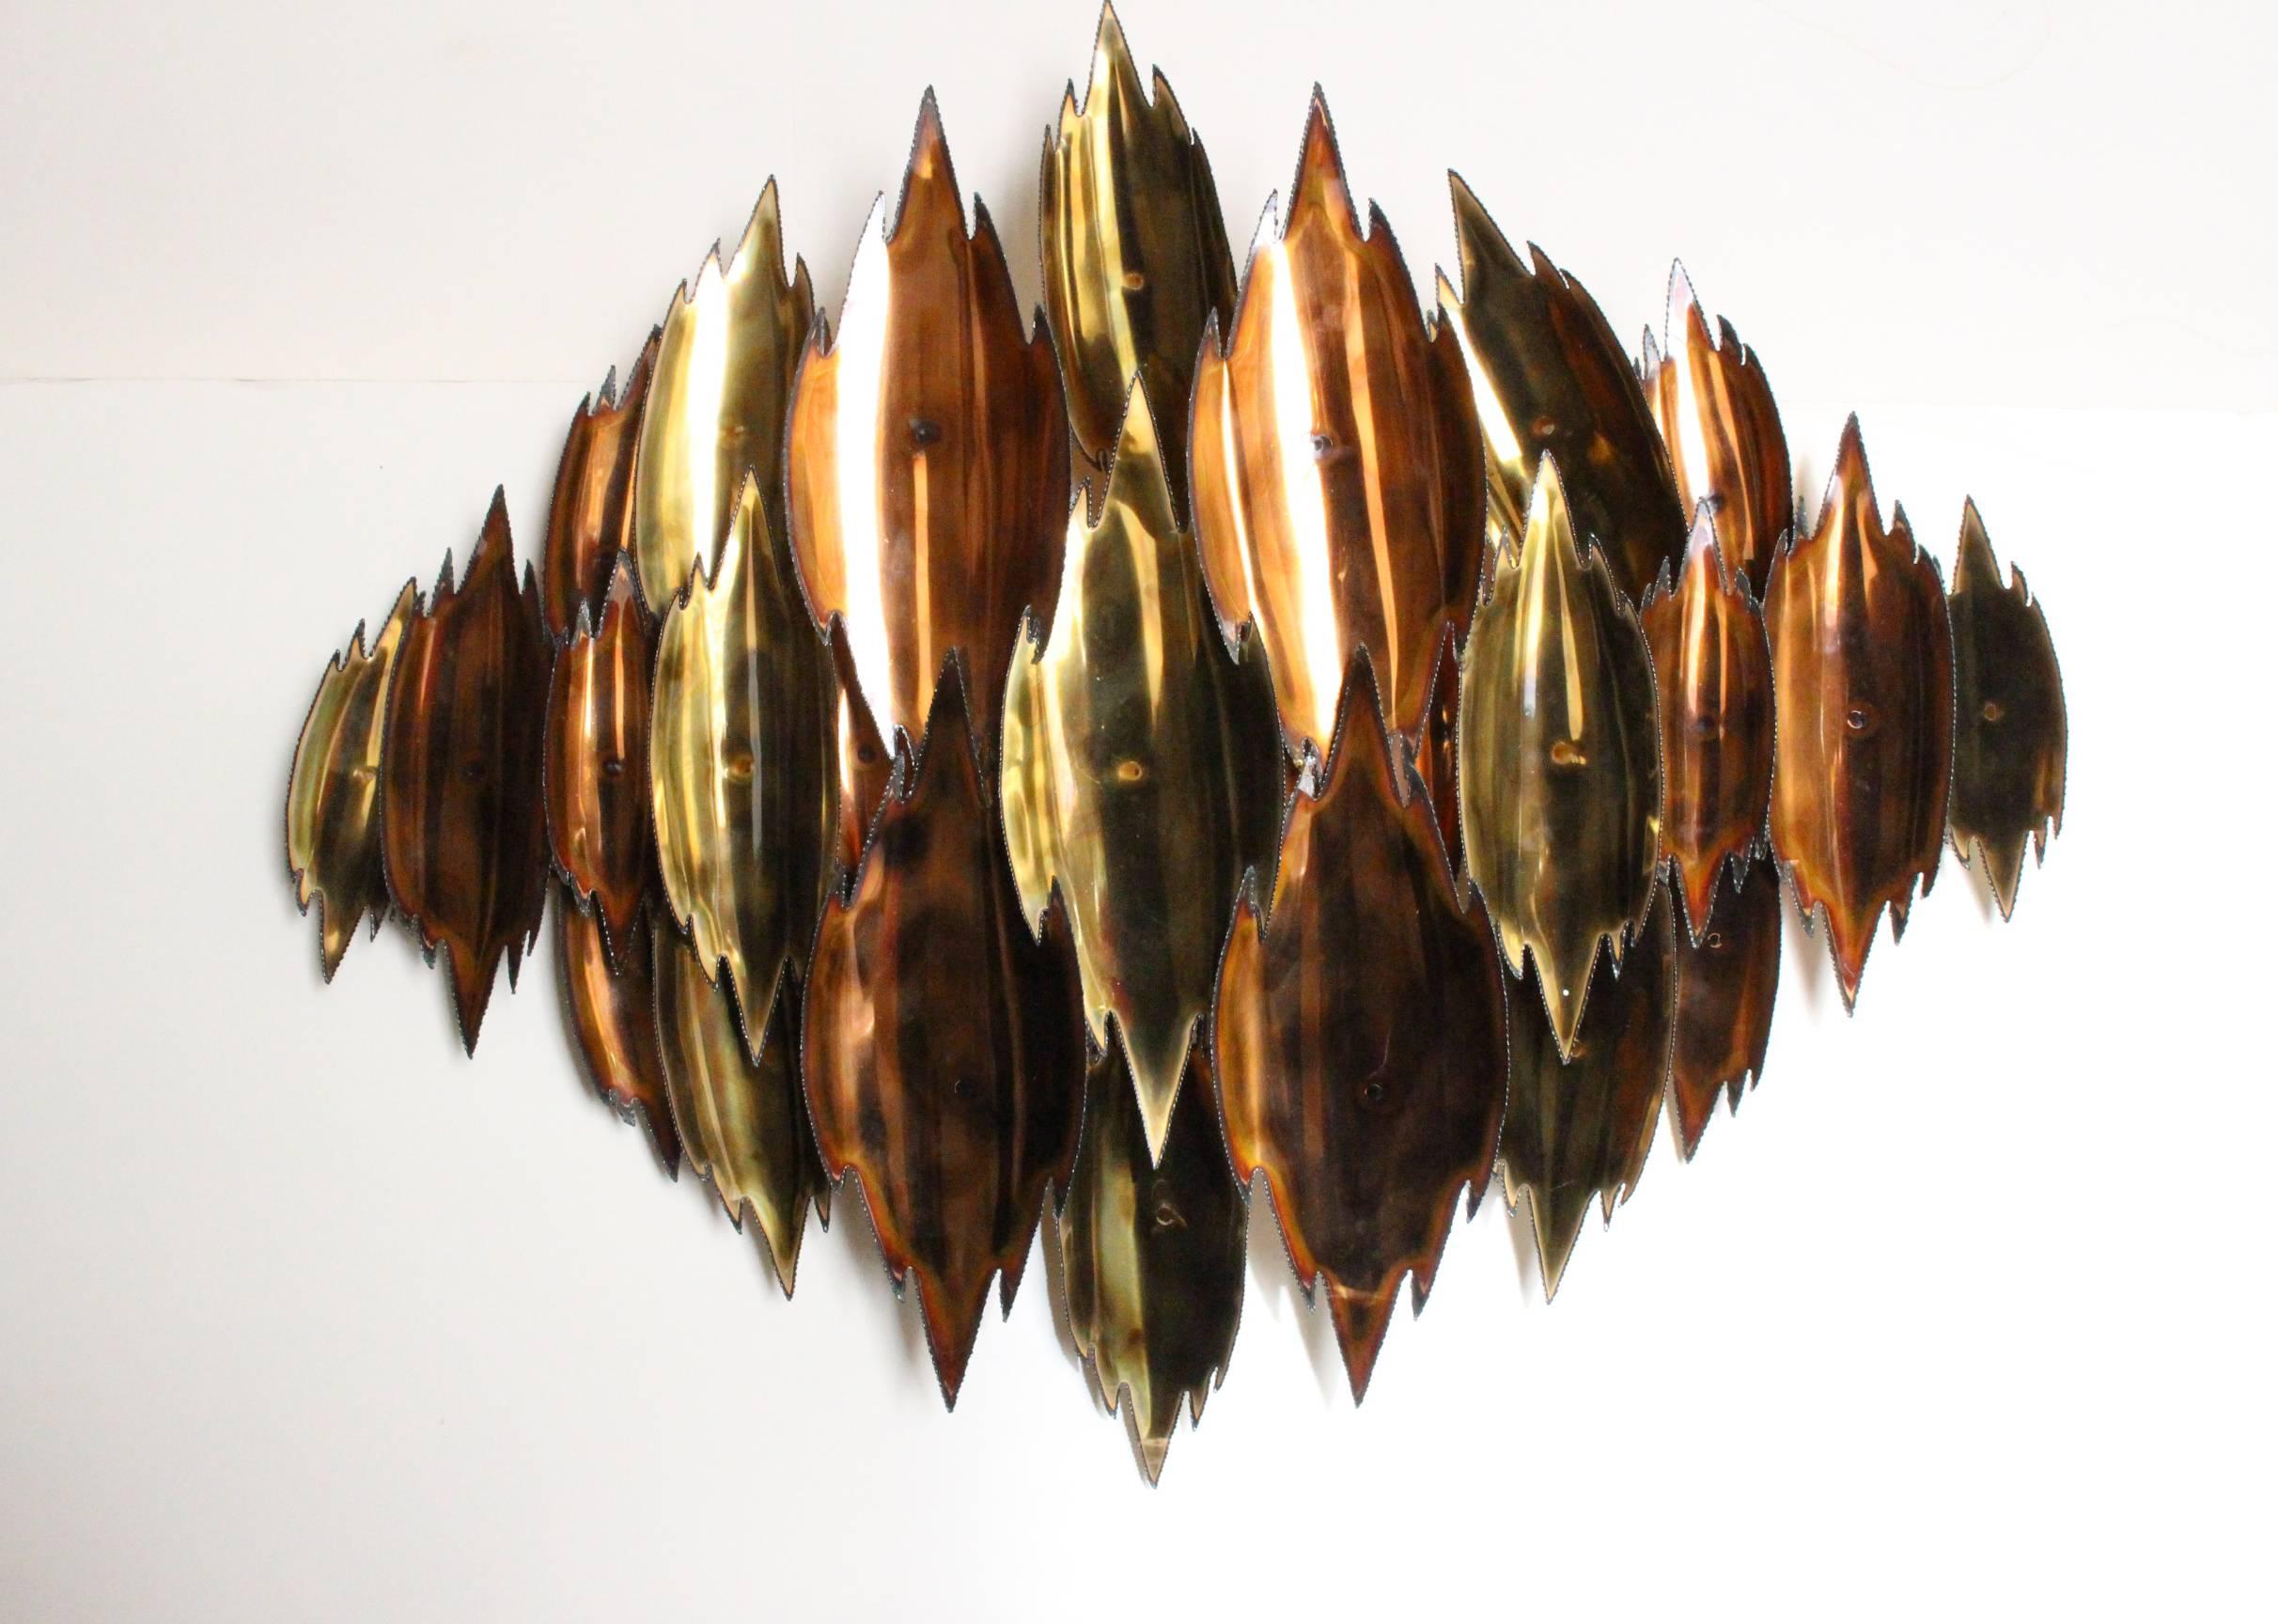 1970s brass and copper Brutalist wall sculpture.

Dimensions: 38